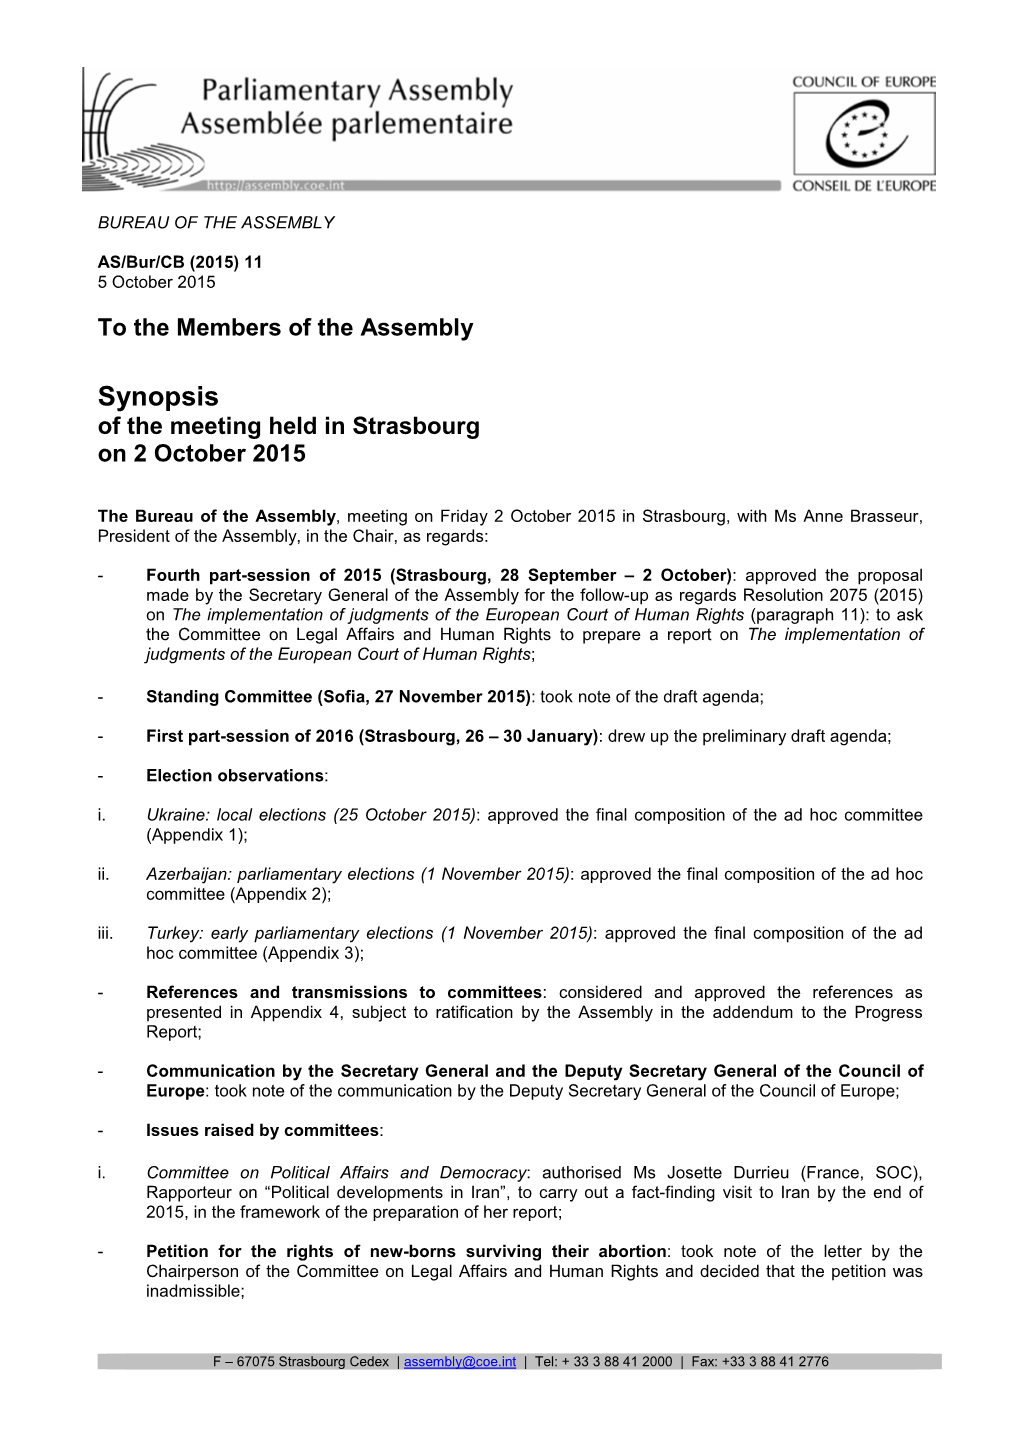 Synopsis of the Meeting Held in Strasbourg on 2 October 2015